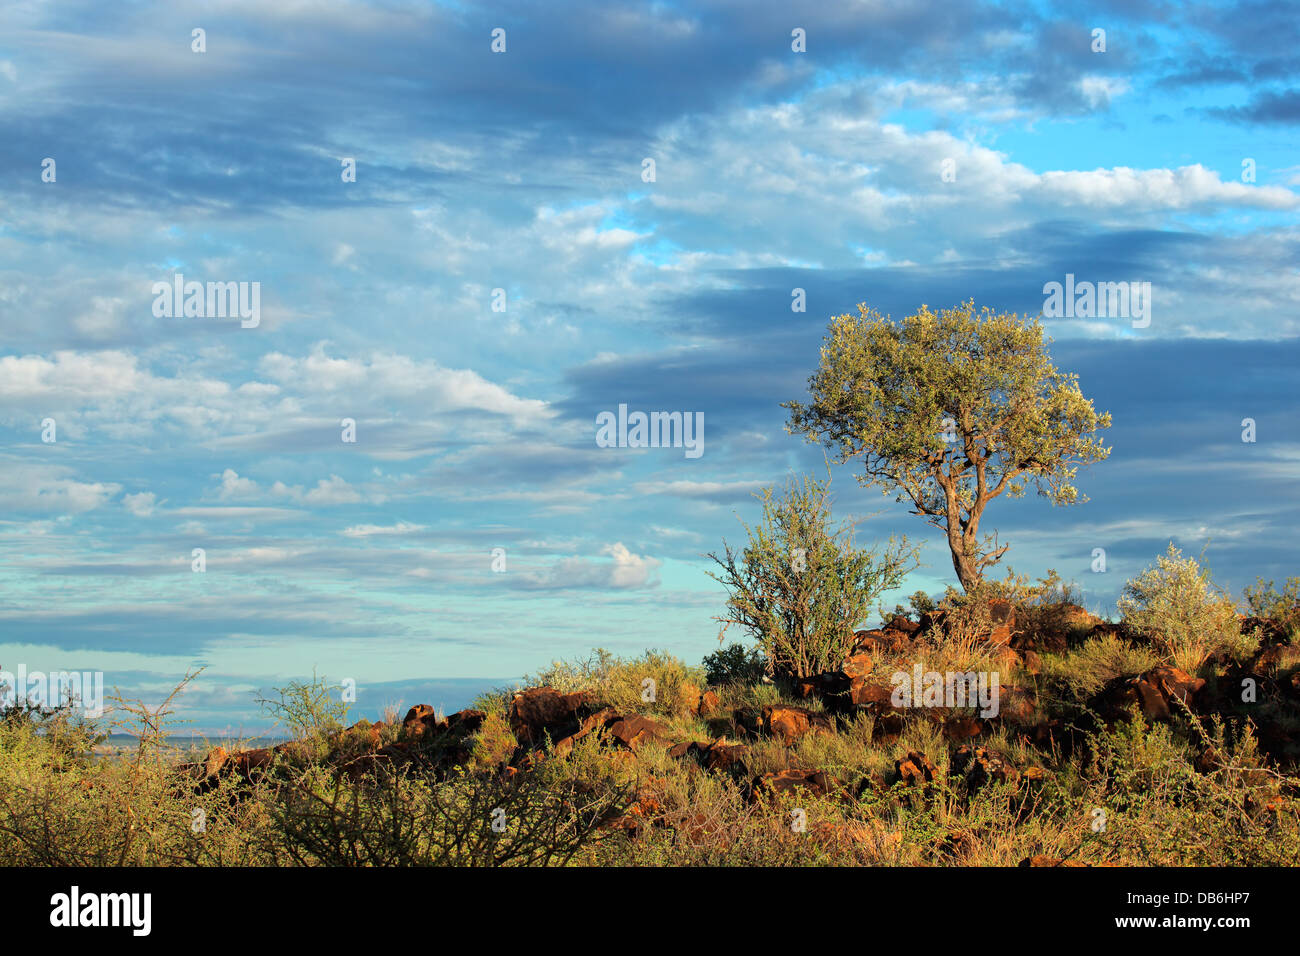 African landscape with a tree on a rocky ridge against a blue sky with clouds Stock Photo